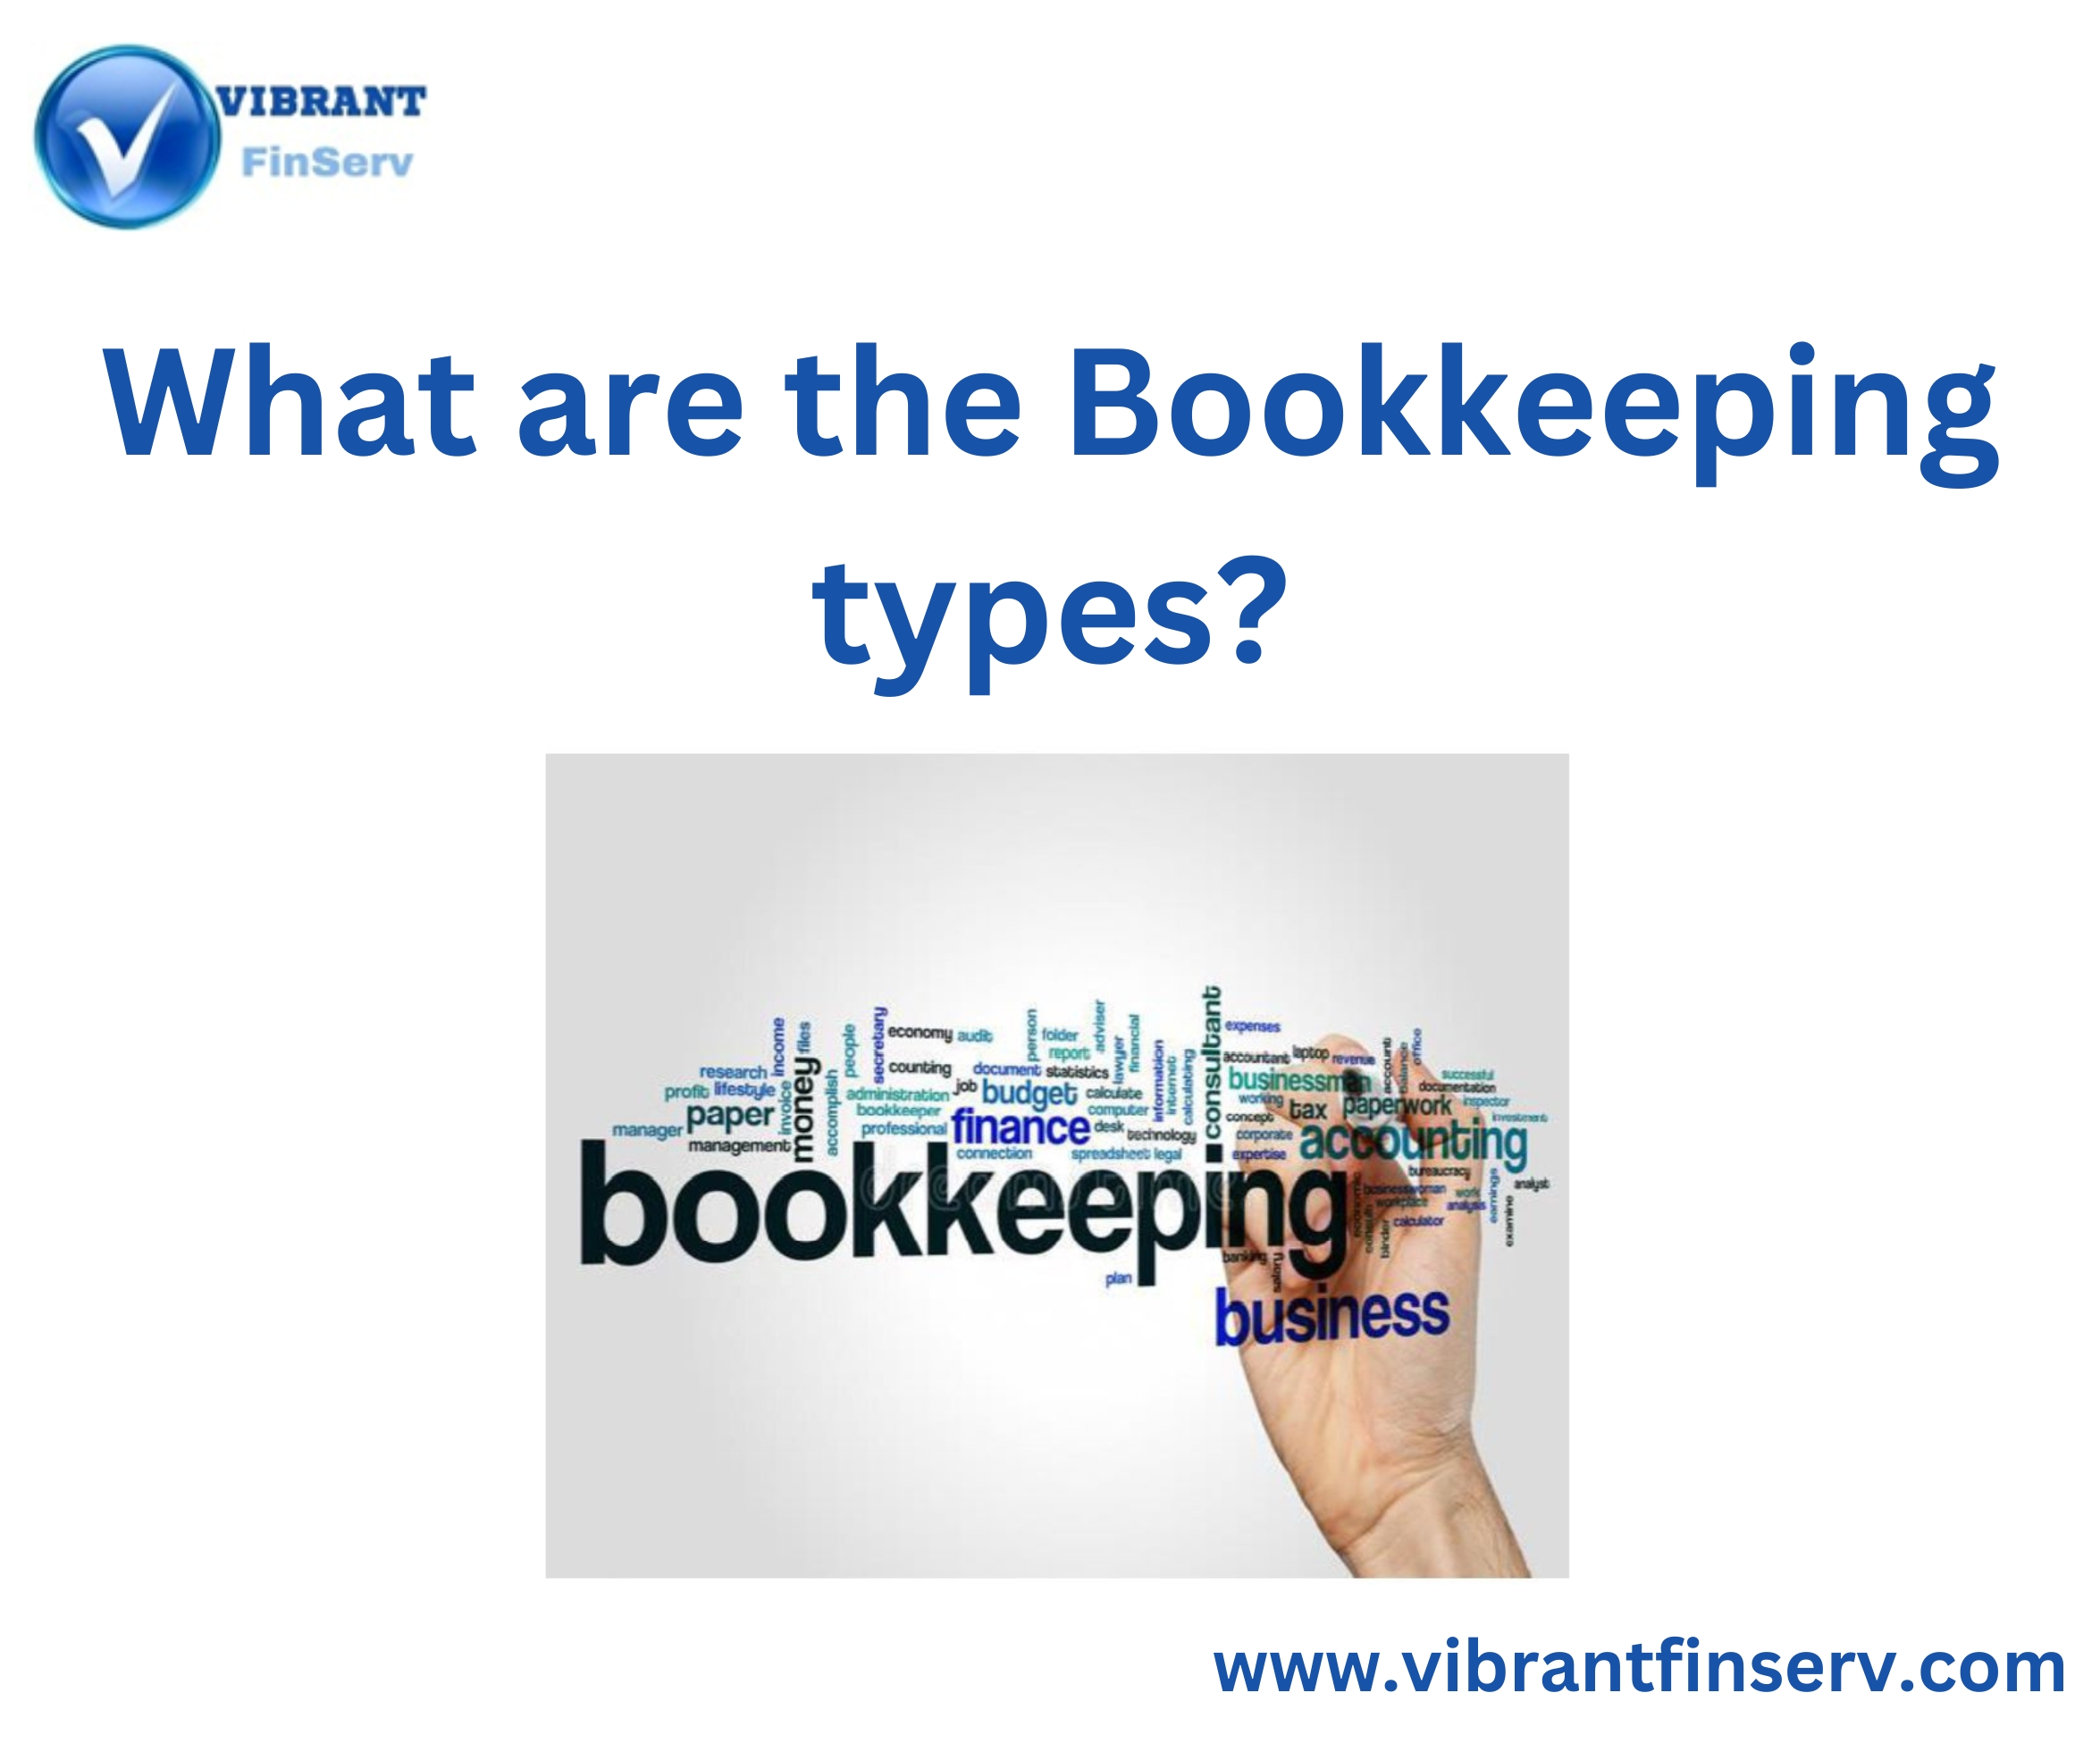 Bookkeeping types